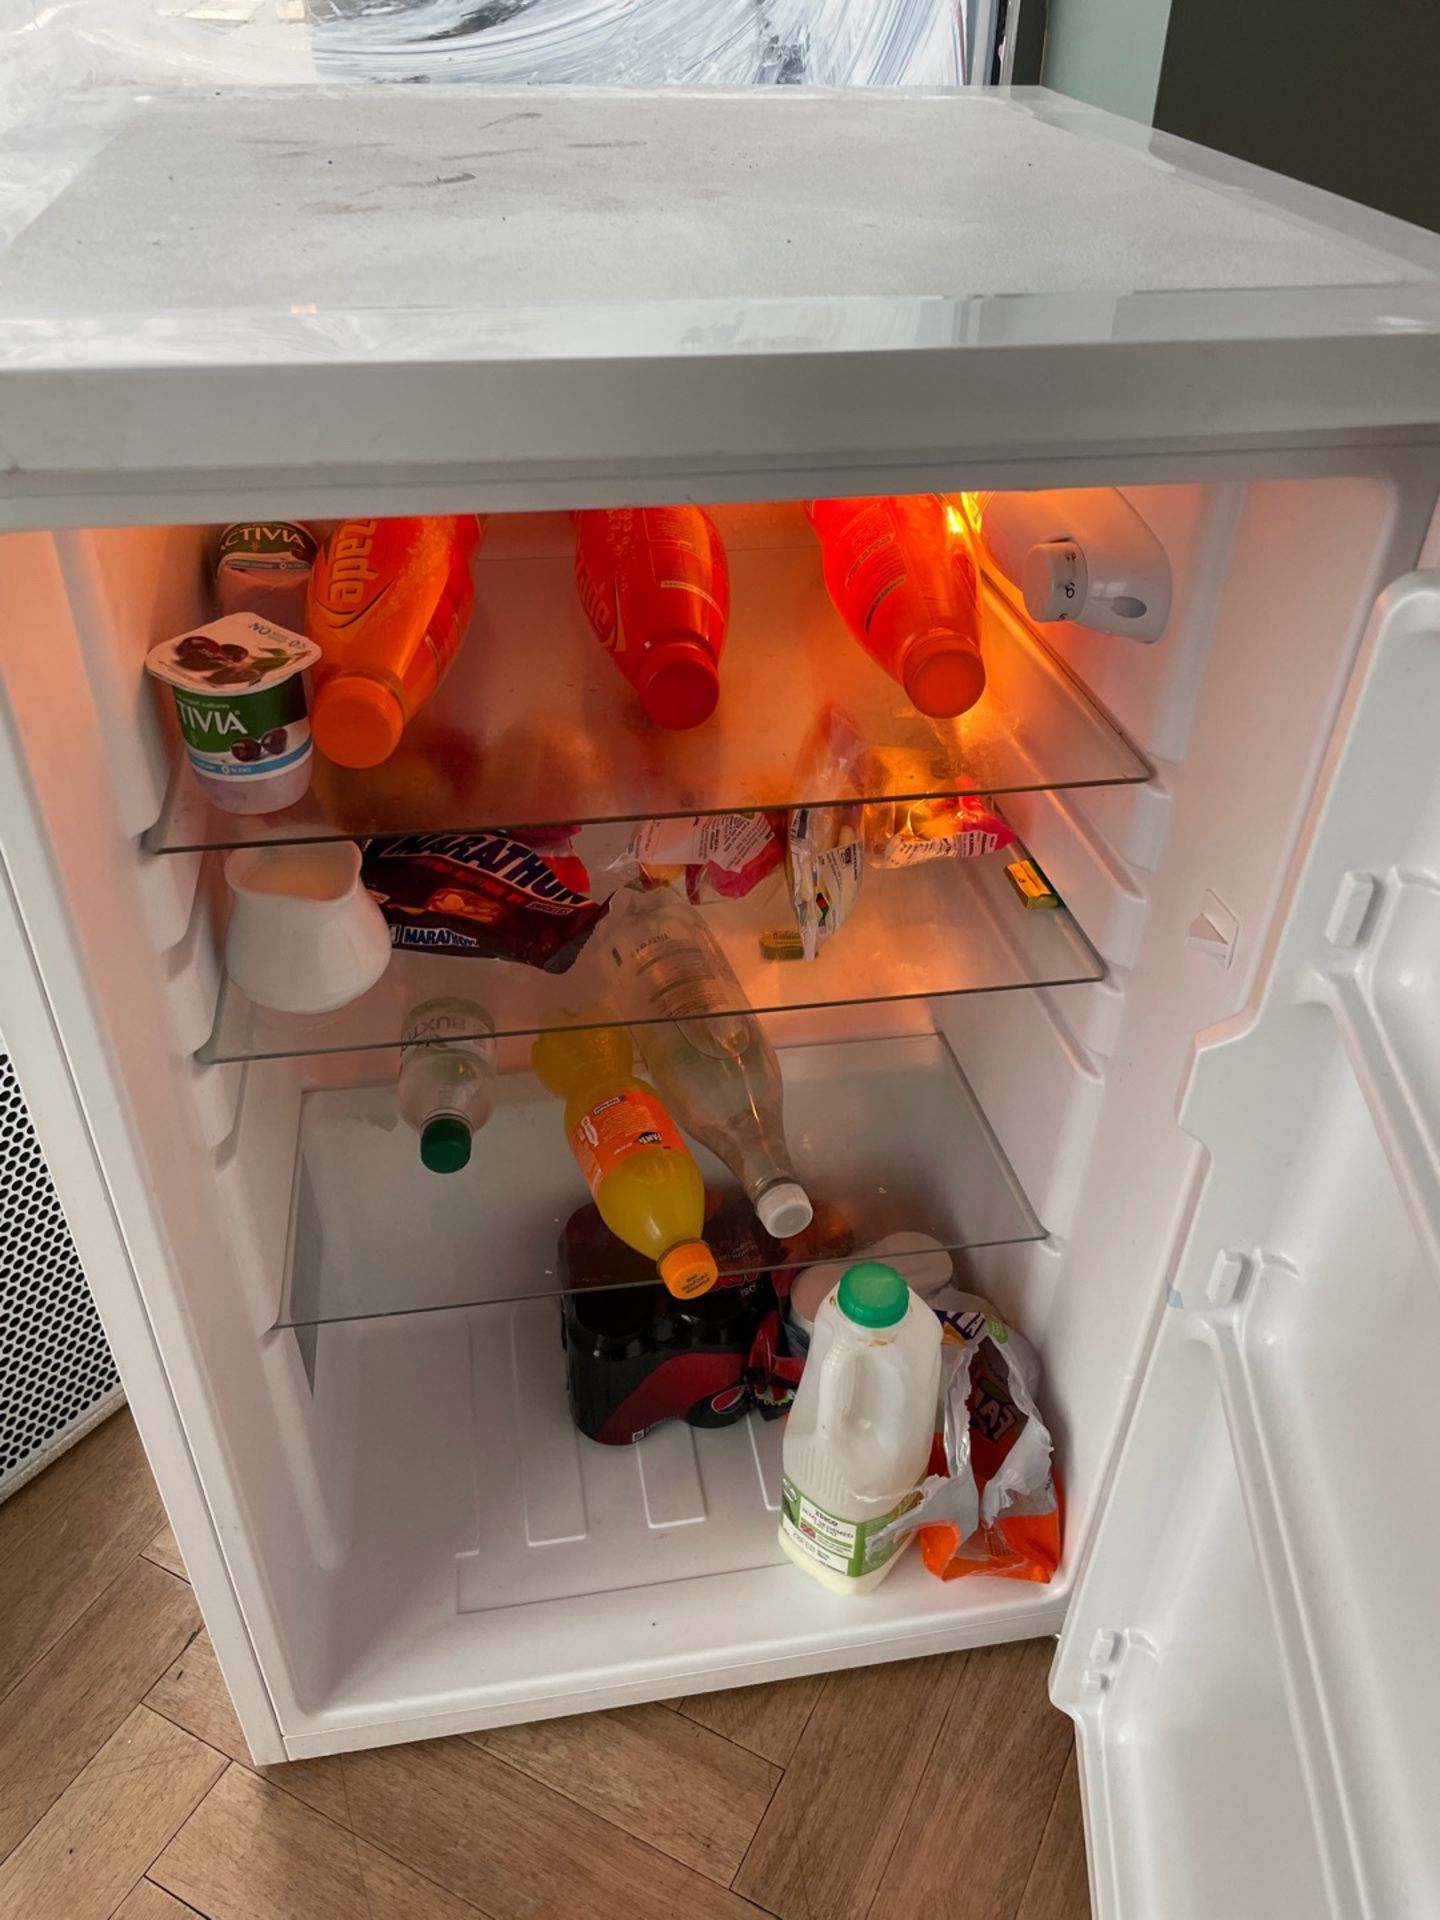 Curry's CUL55W12 White Refrigerator - Image 2 of 3